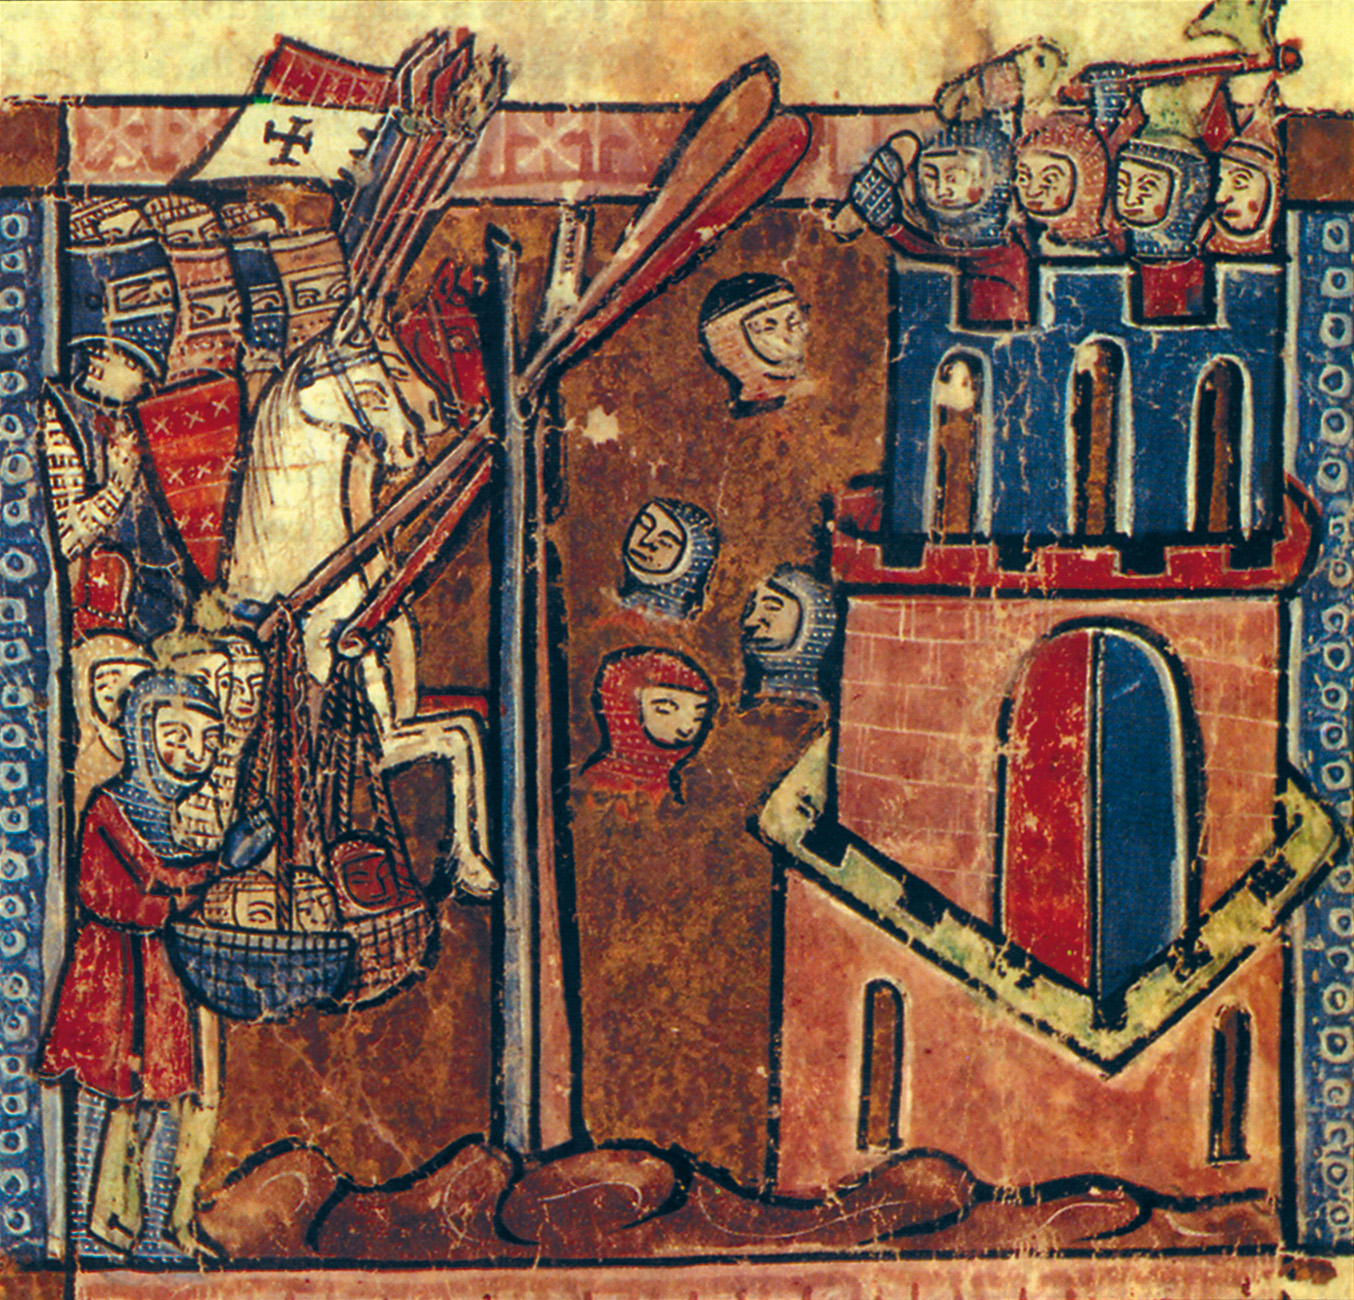 A 13th century painting depicting the Crusaders at Nicaea demonstrates the unique "versatility" of the infamous catapult.